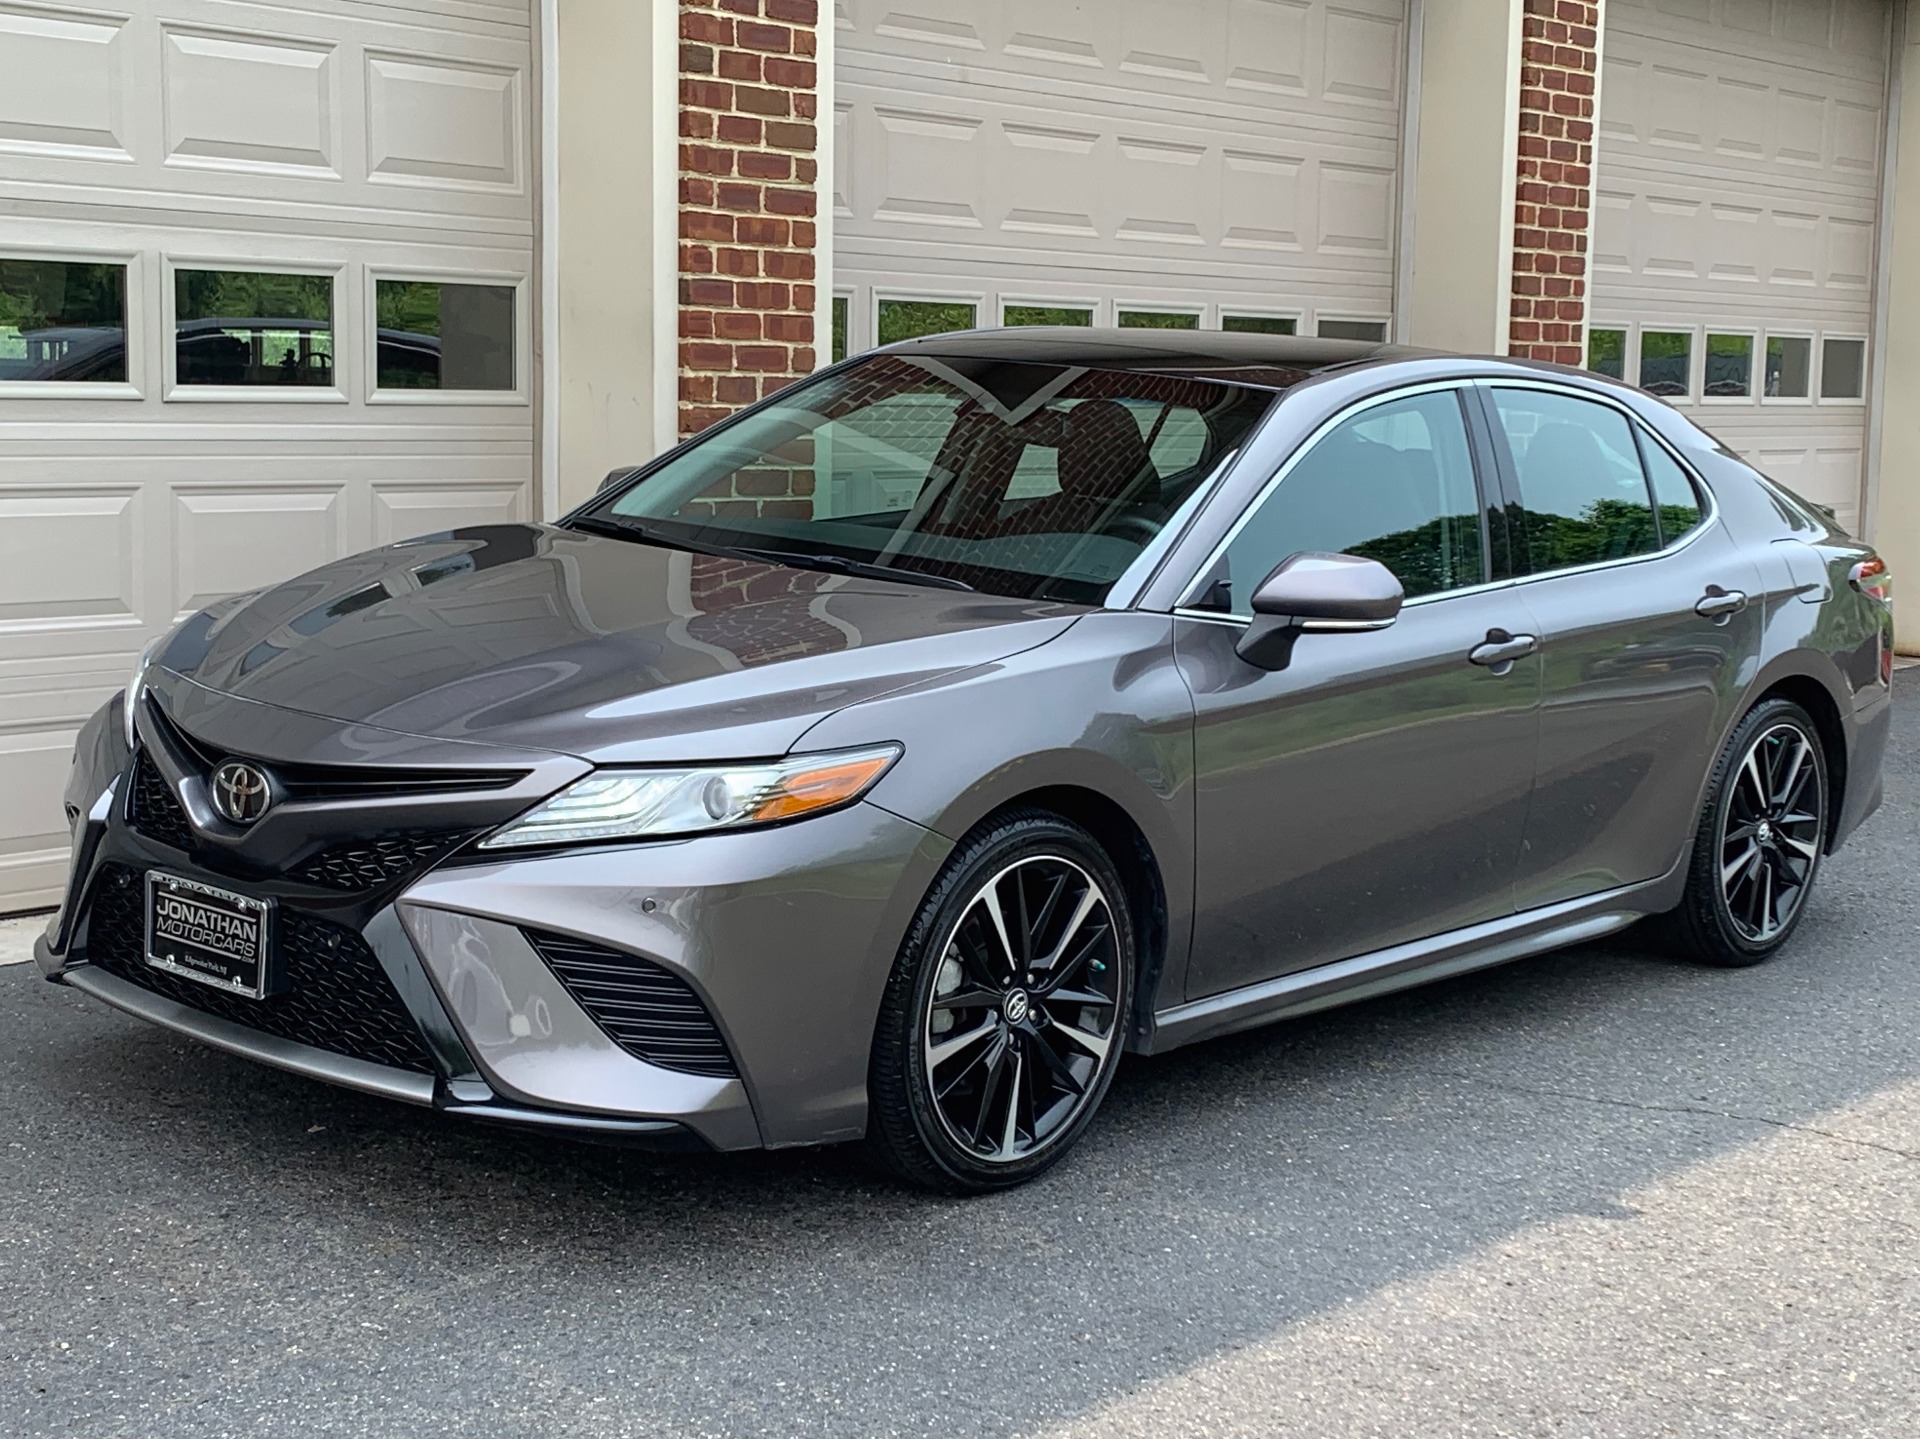 2018 Toyota Camry Xse Stock 025586 For Sale Near Edgewater Park